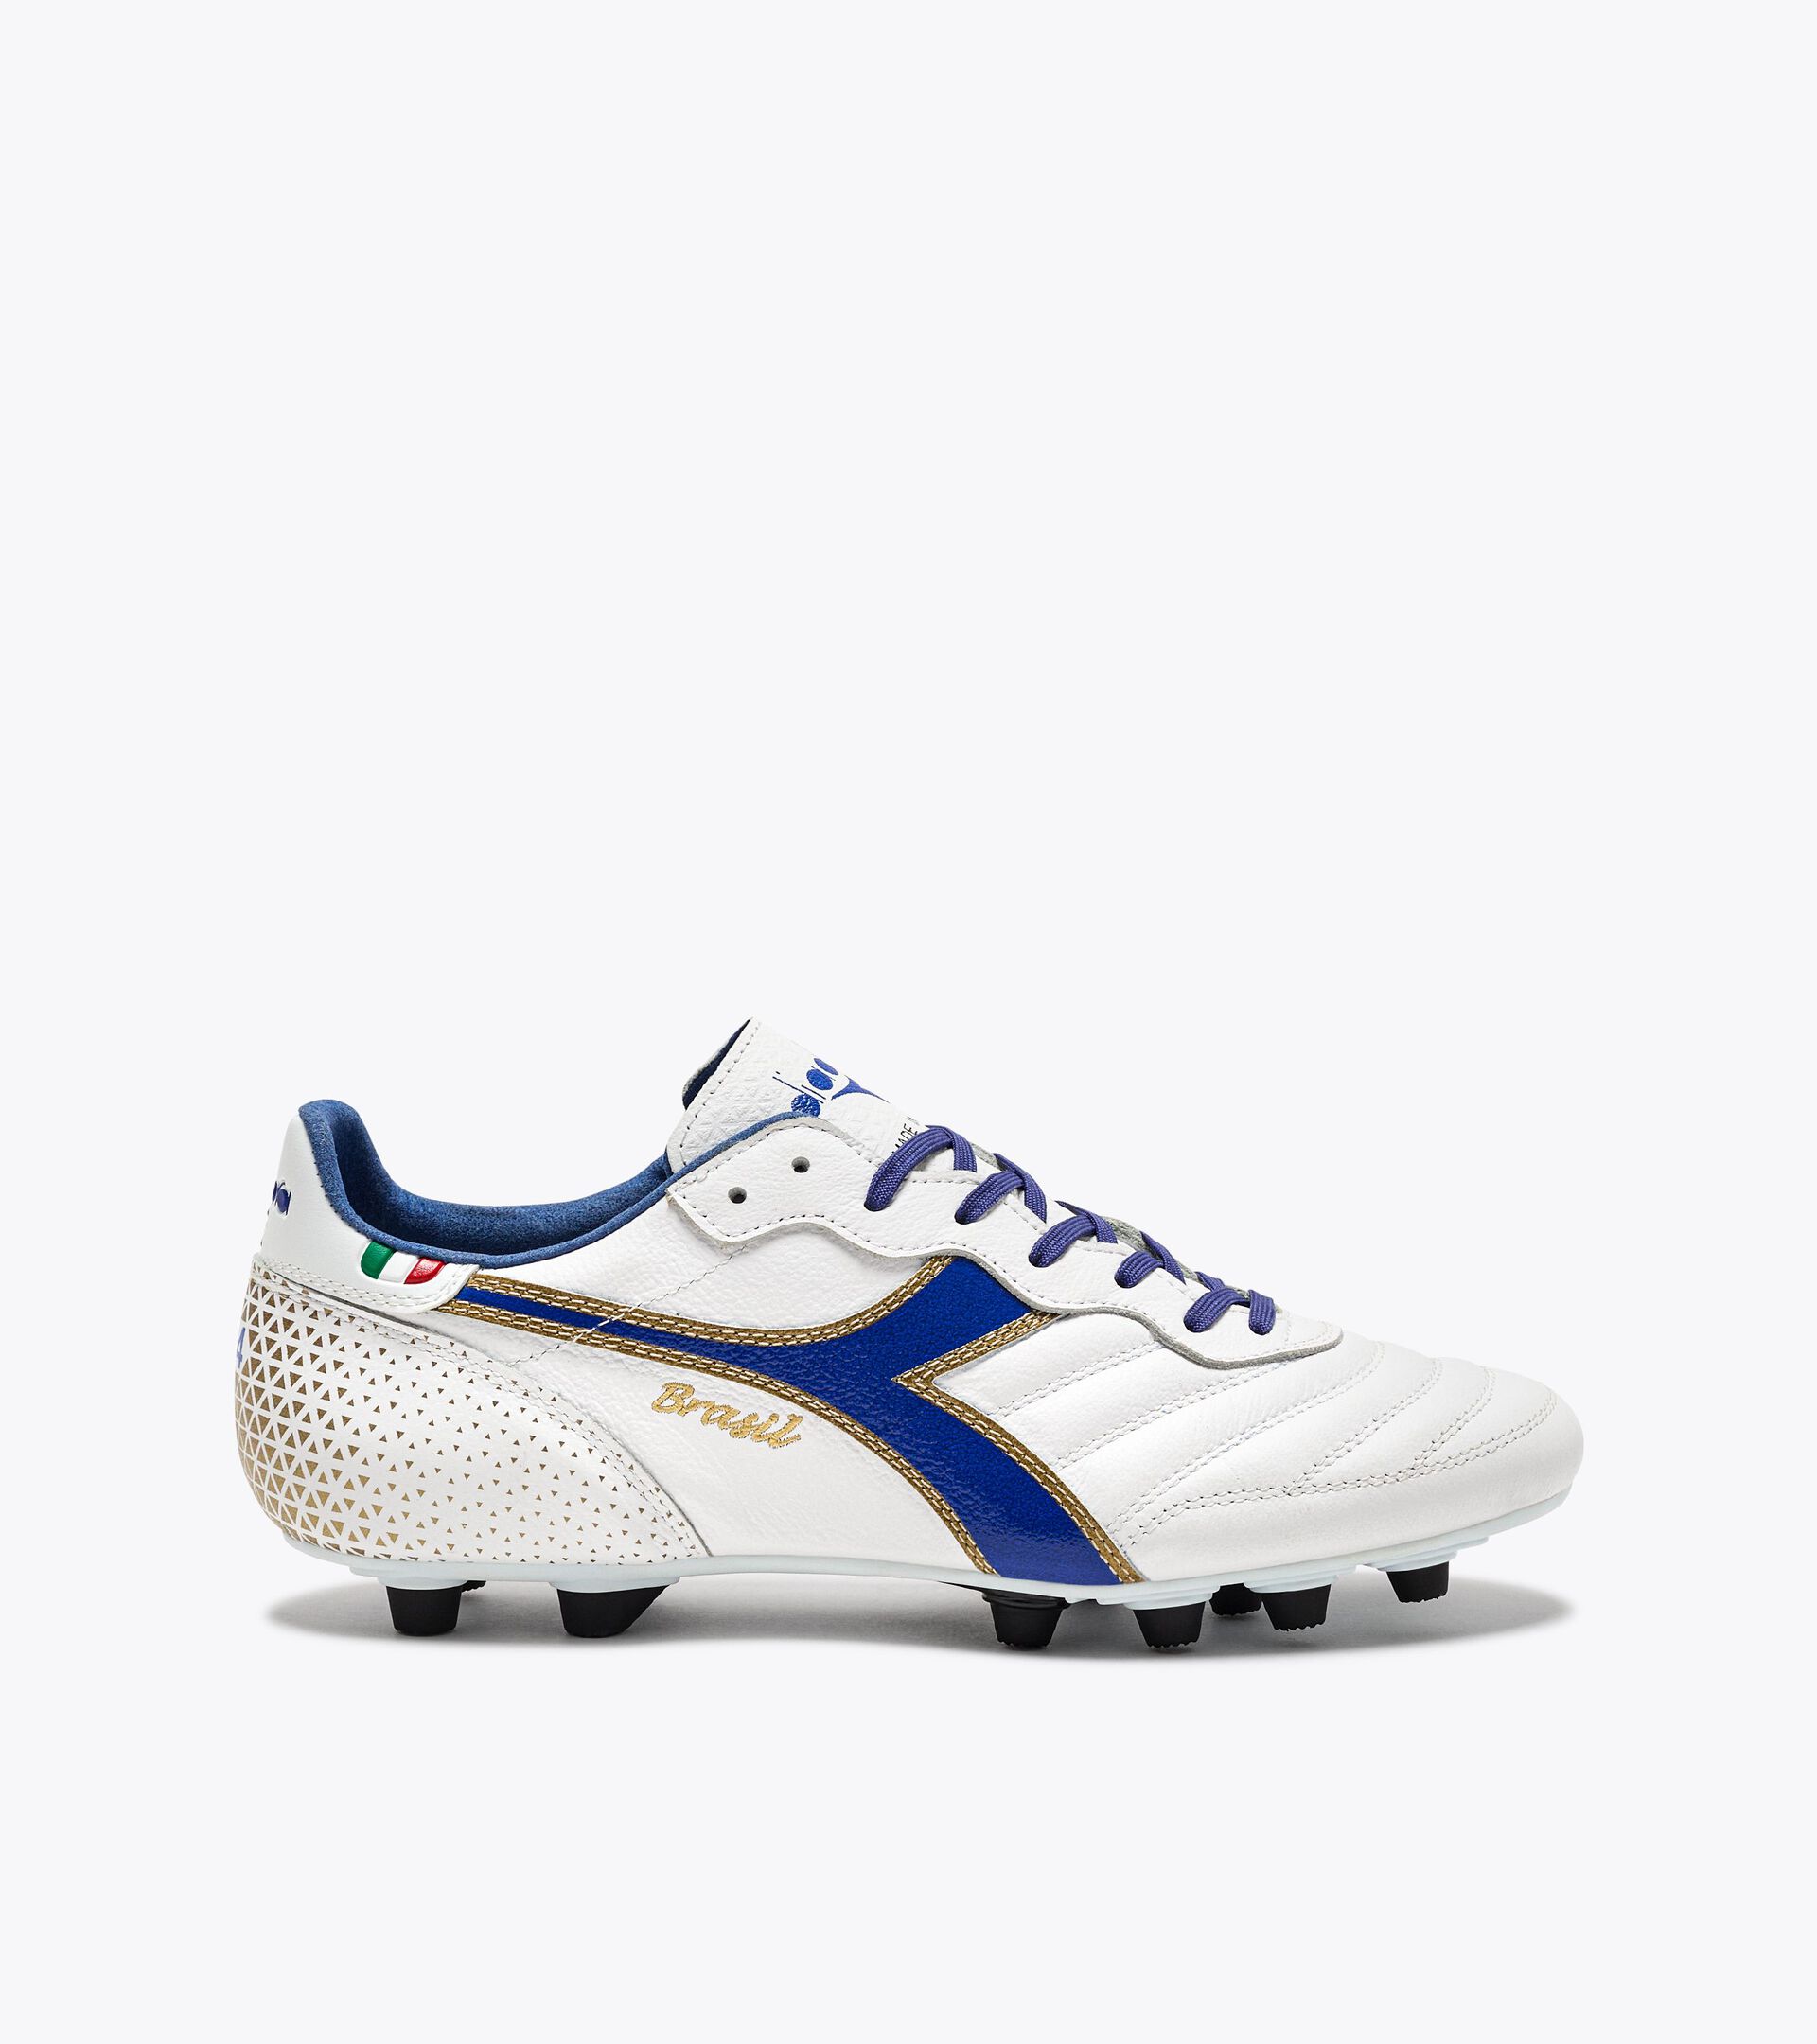 Calcio boots for firm grounds - Made in Italy - Gender Neutral BRASIL ITALY OG GR LT+  MDPU WHITE/MAZARINE BLUE/GOLD - Diadora